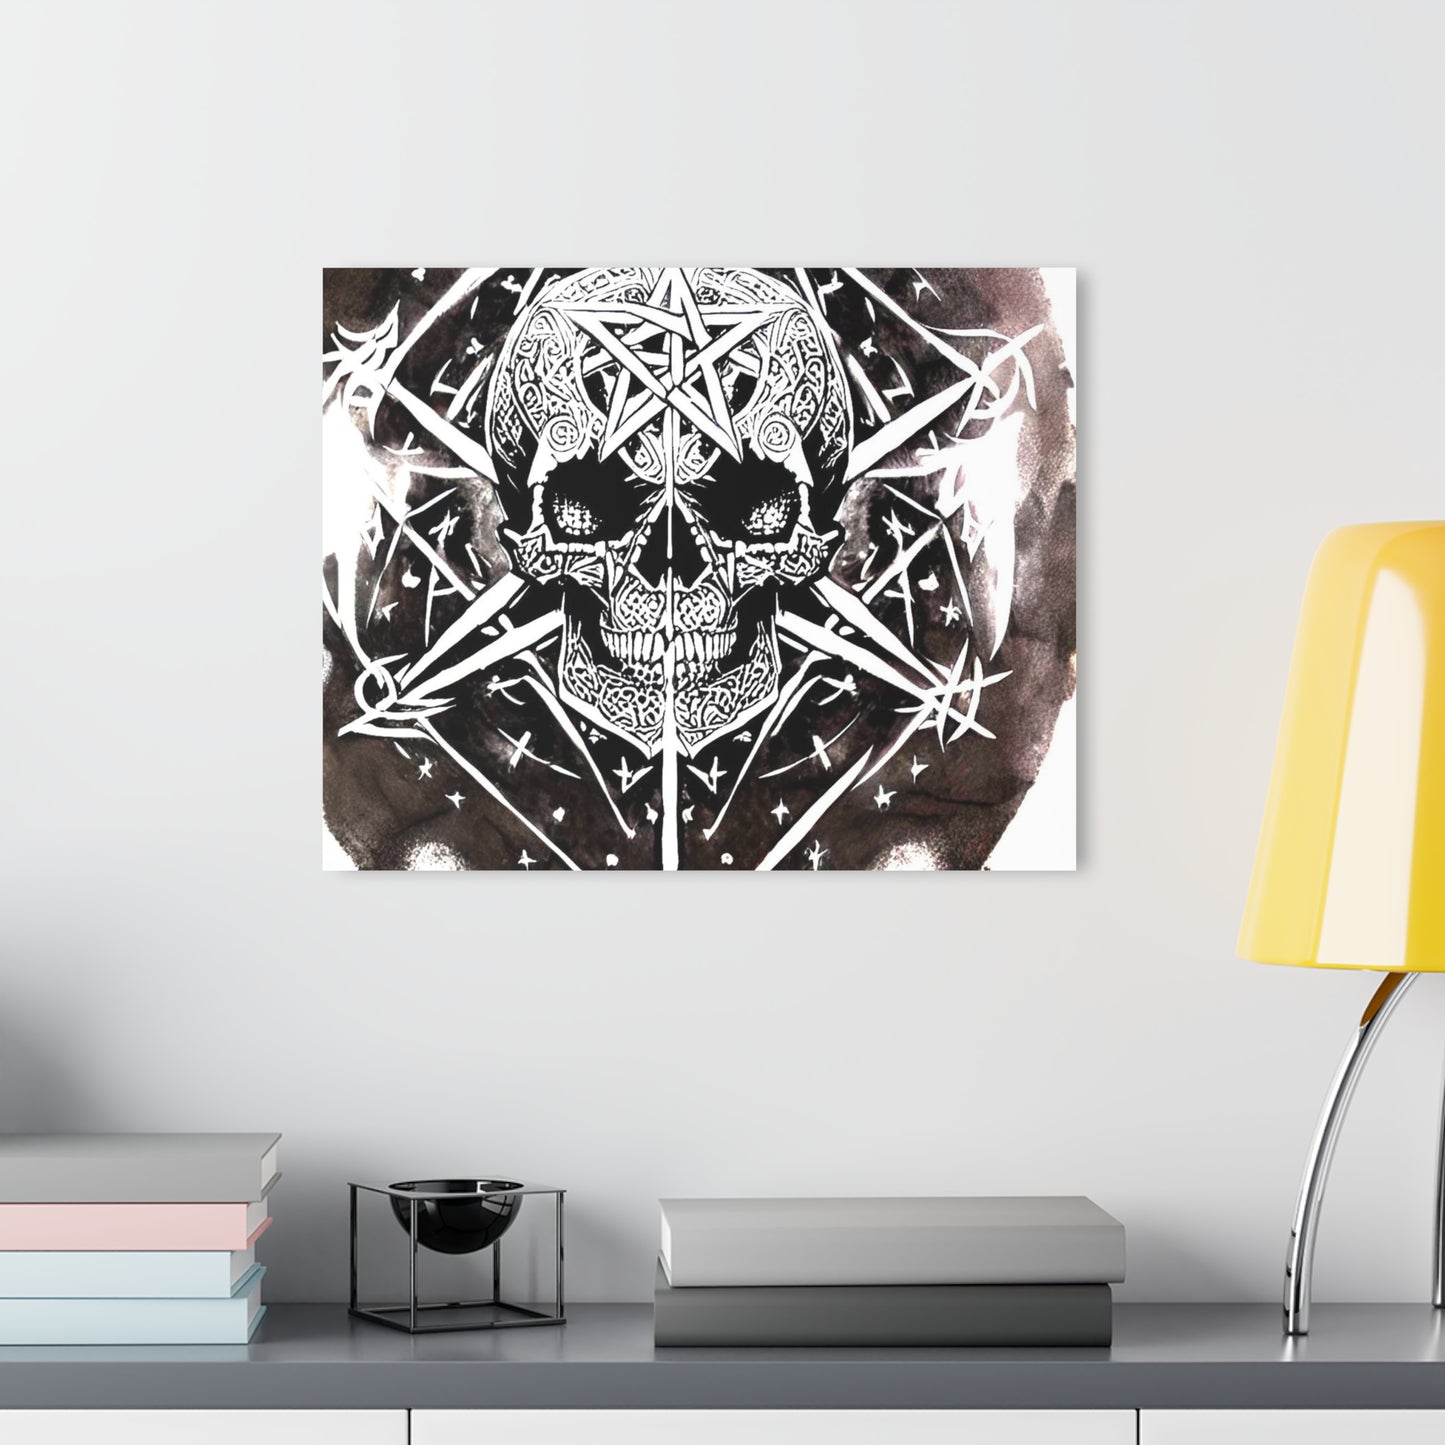 Pentagram Skull Acrylic Prints (French Cleat Hanging)